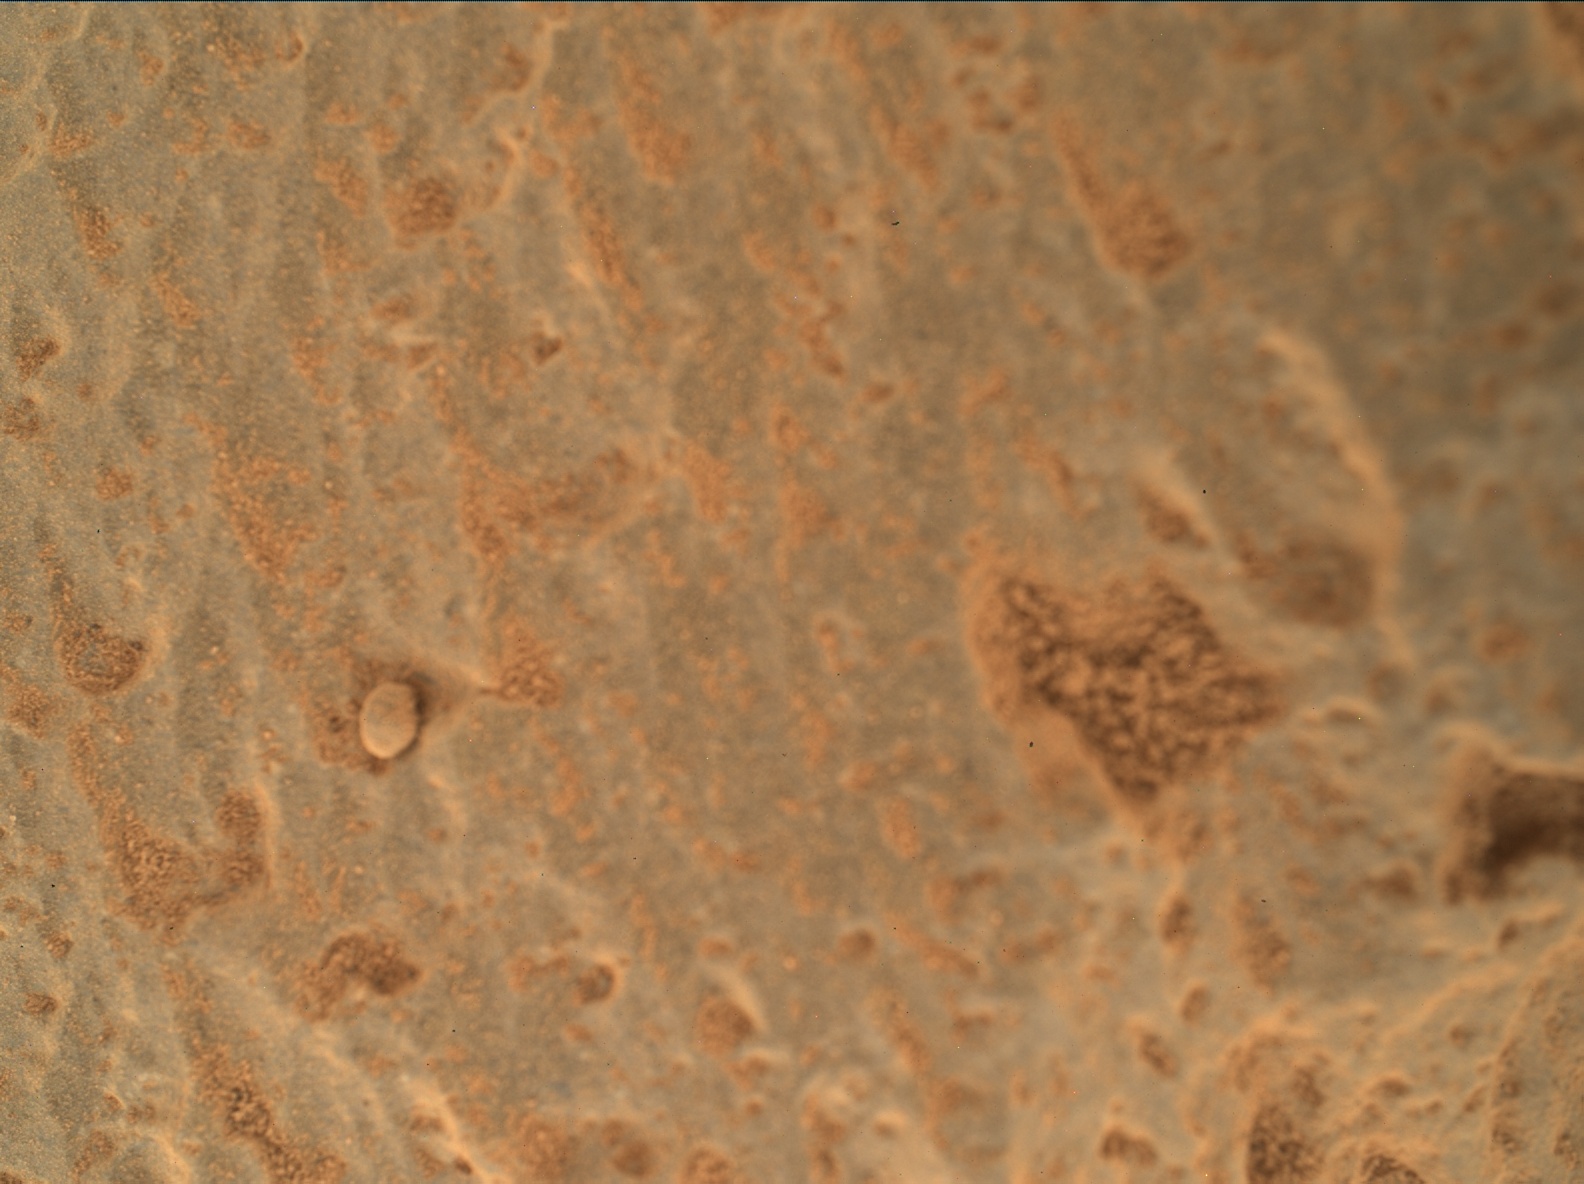 Nasa's Mars rover Curiosity acquired this image using its Mars Hand Lens Imager (MAHLI) on Sol 360